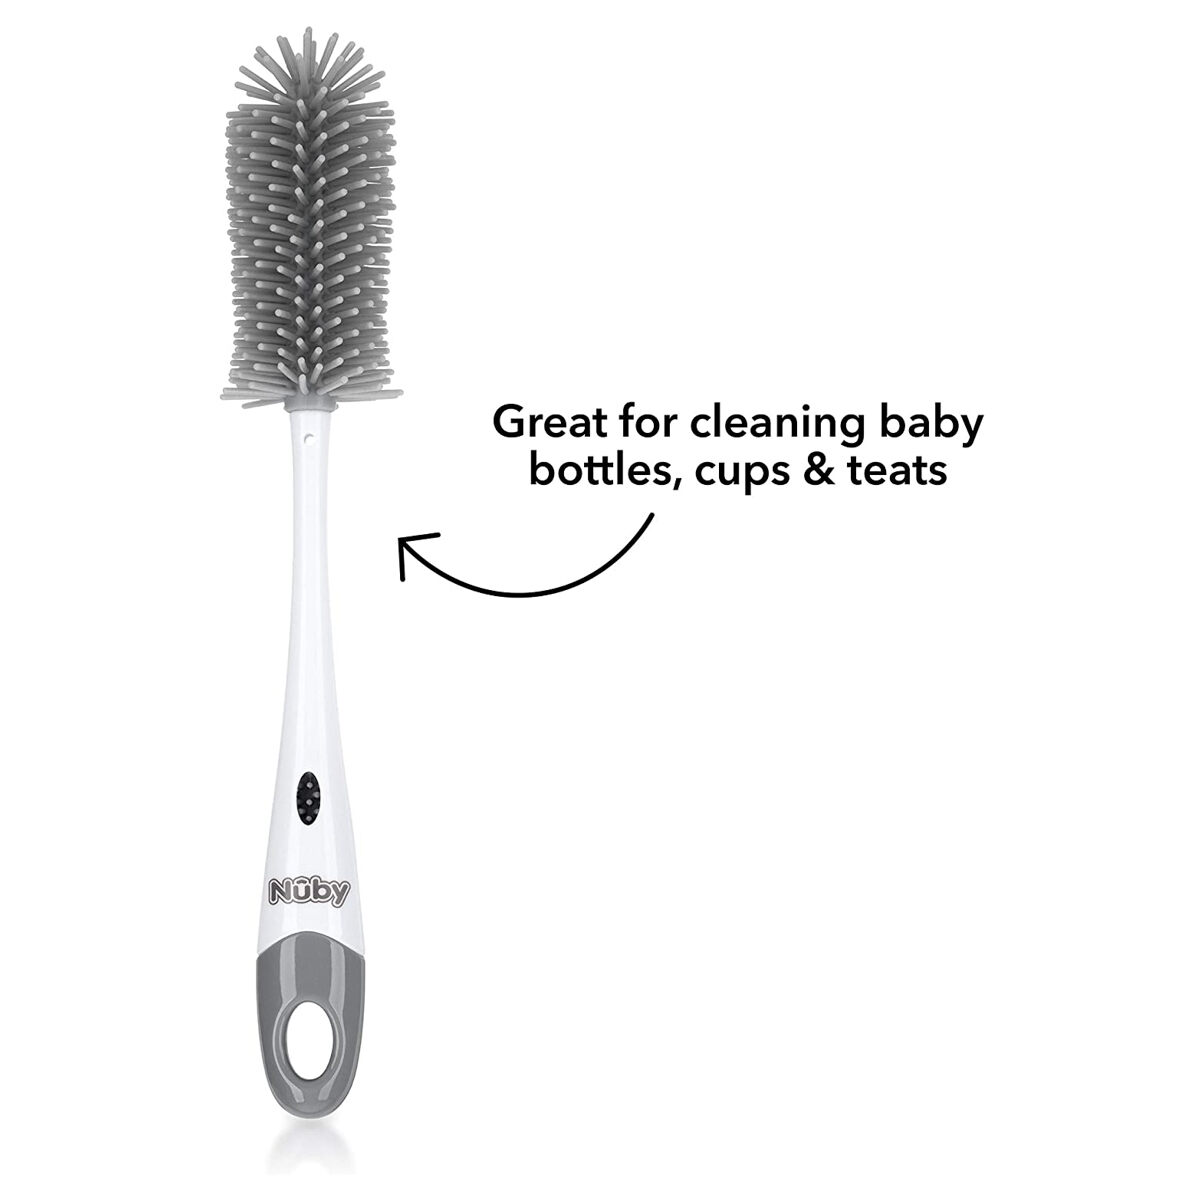 Nuby 2 in 1 Bottle Brush with Stand Review 